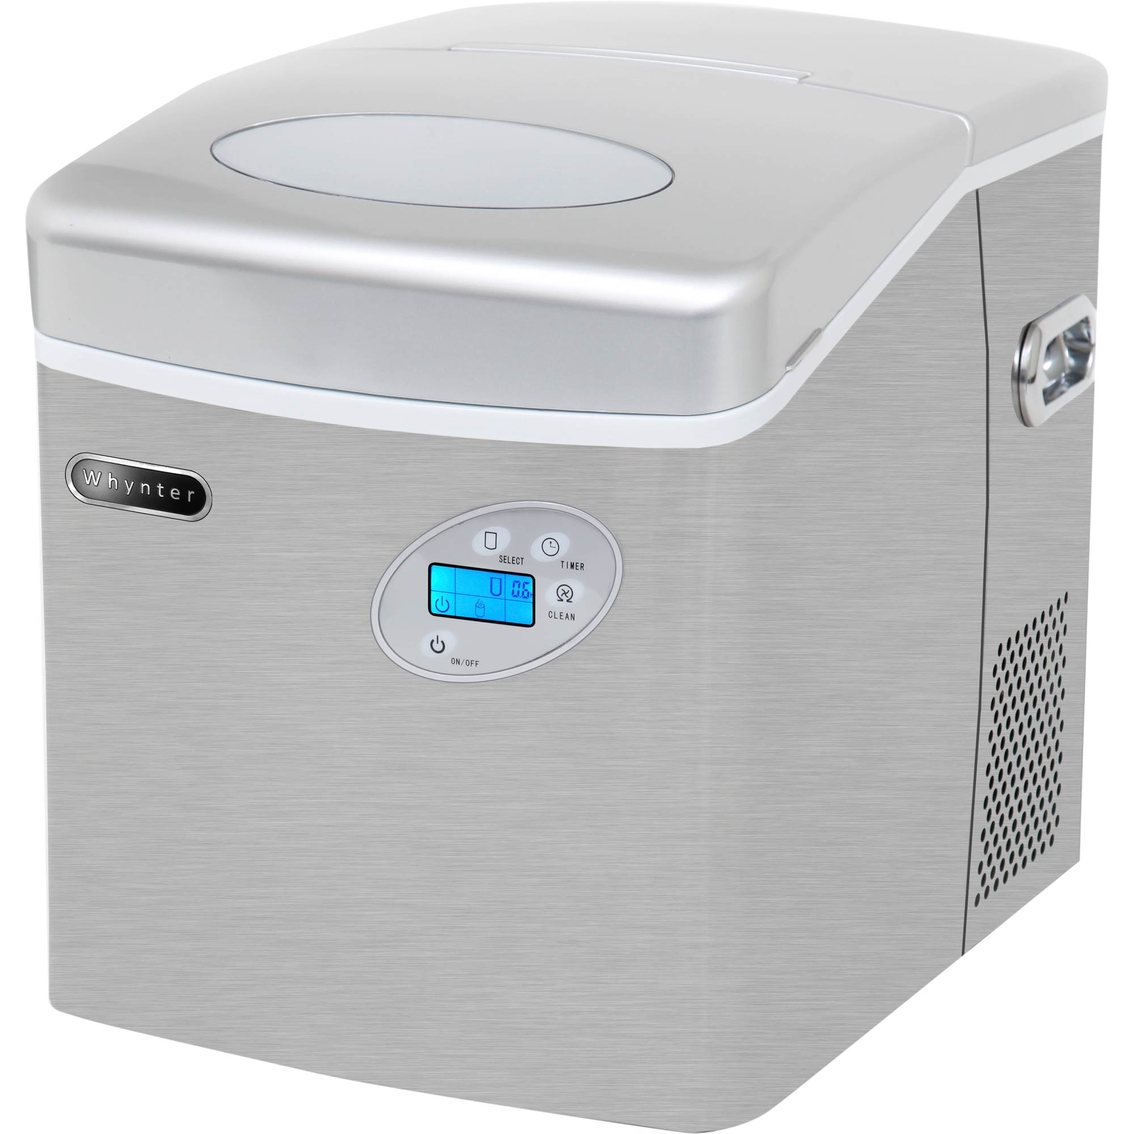 Whynter Portable Ice Maker with 49 lb. Capacity and Water Connection